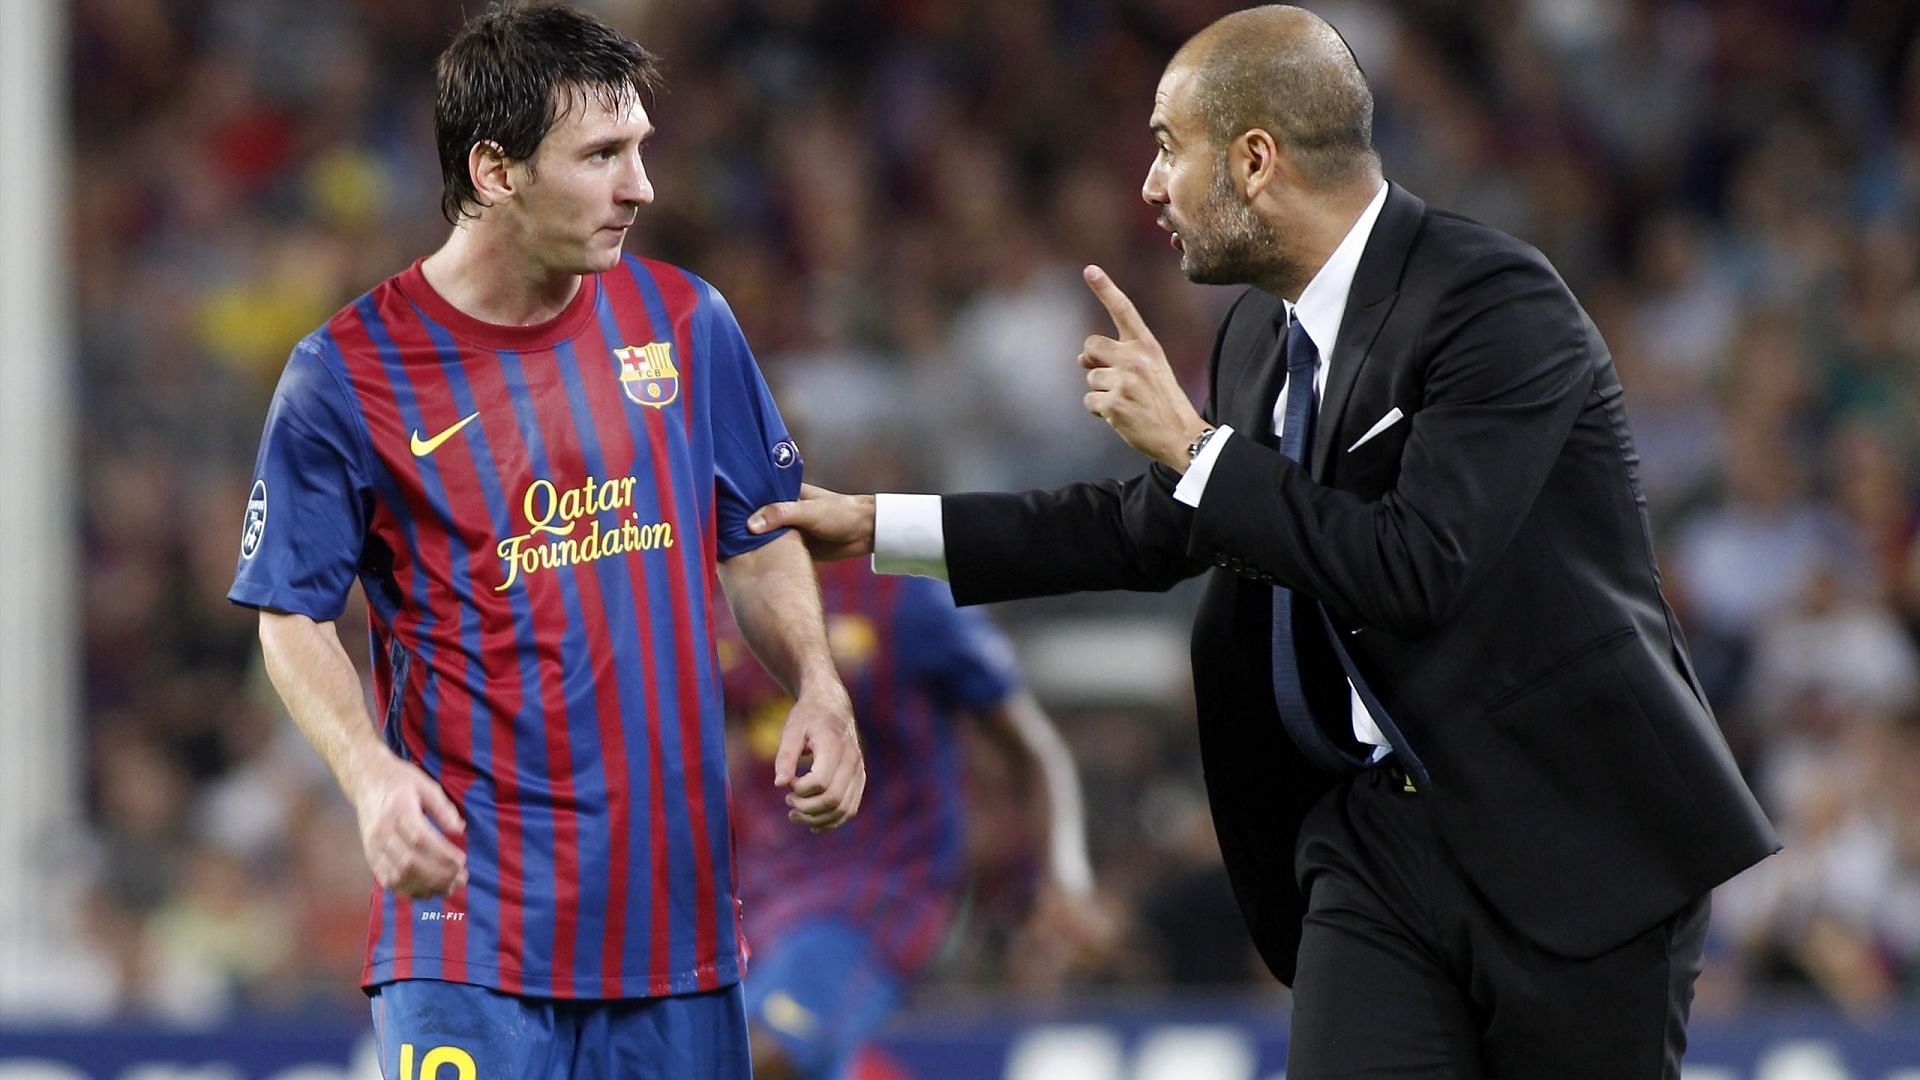 Messi is full of praise for his former Barca boss (right).